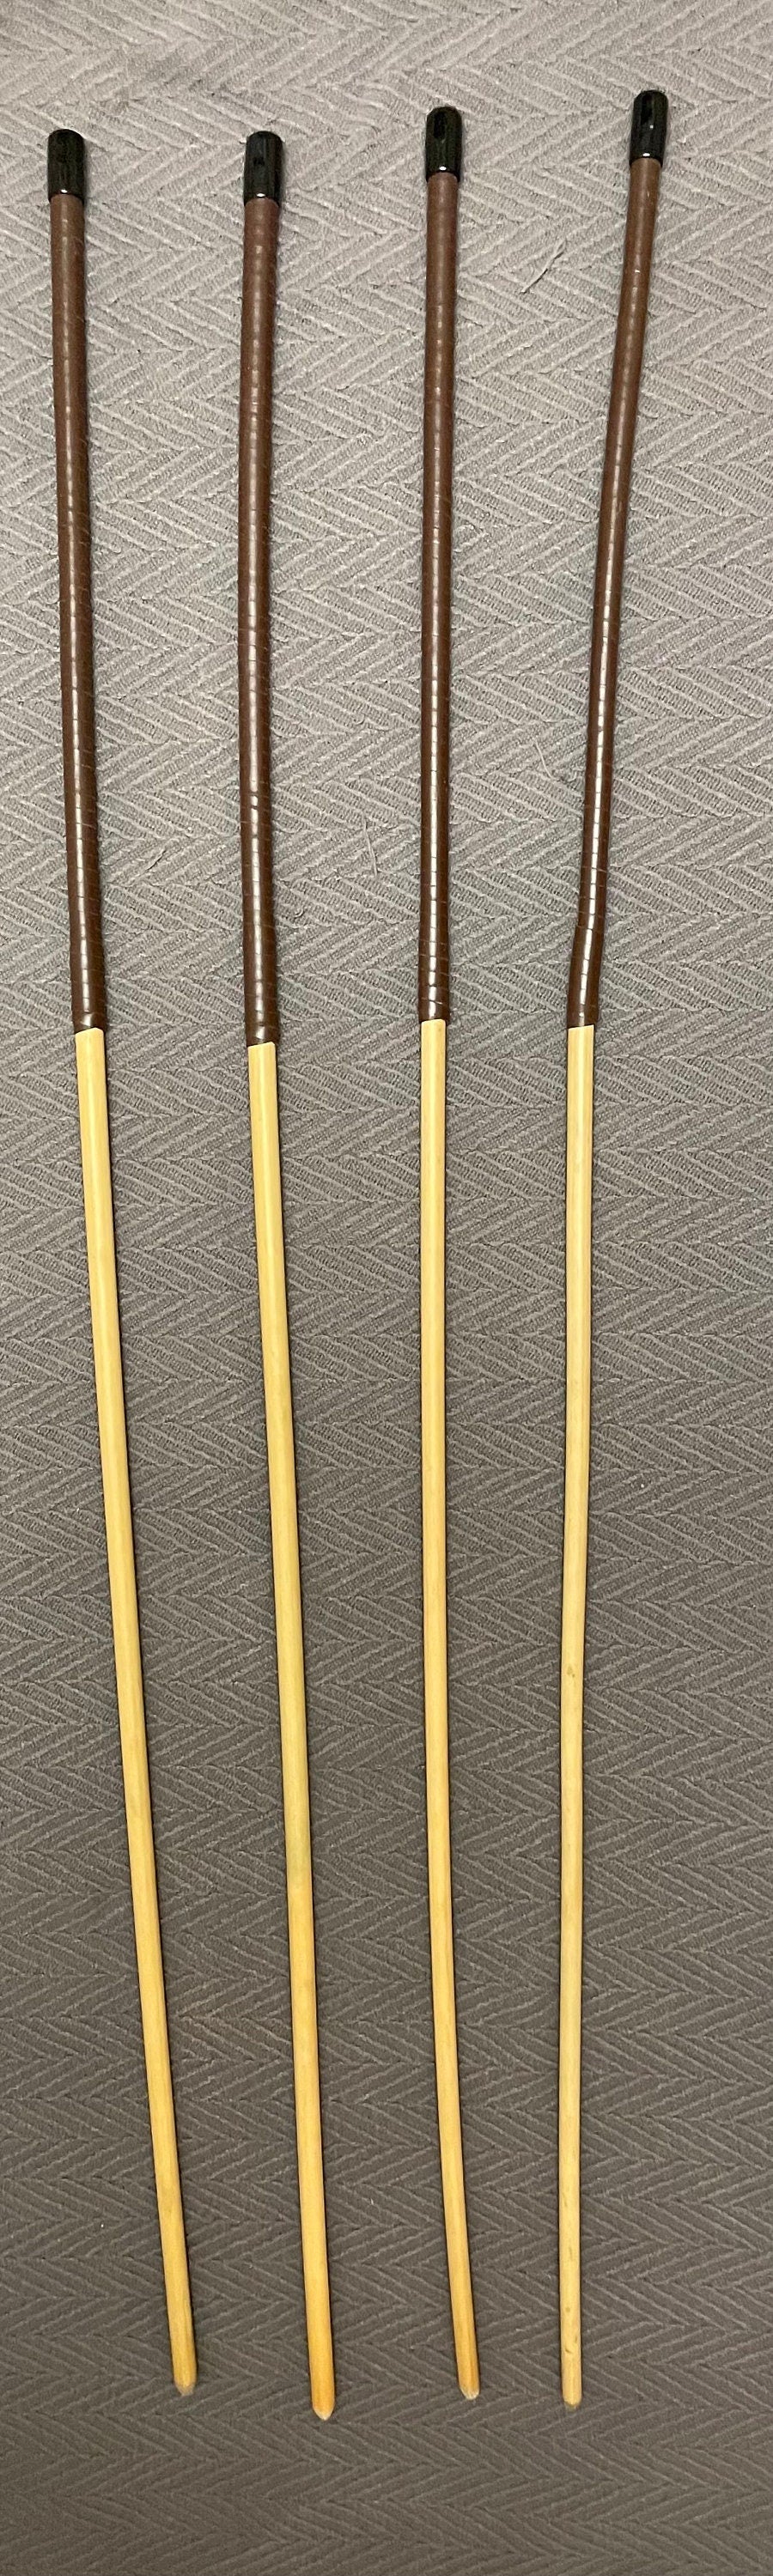 Knotless Dragon Canes / Ultimate Rattan Canes Set of 4 with Brandy Kangaroo Leather Handles 92 cms Length